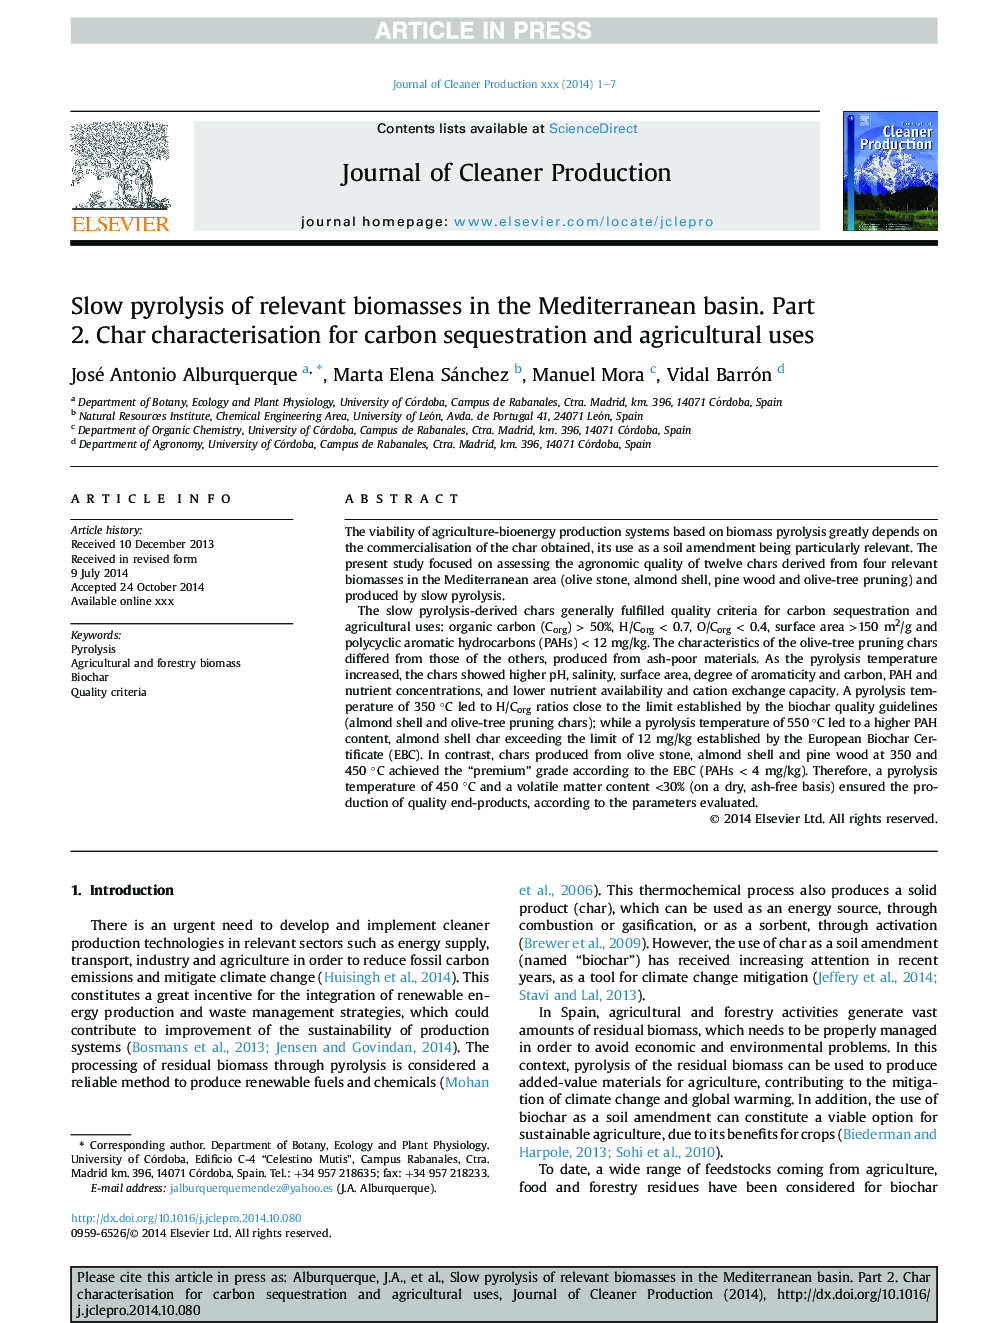 Slow pyrolysis of relevant biomasses in the Mediterranean basin. Part 2. Char characterisation for carbon sequestration and agricultural uses